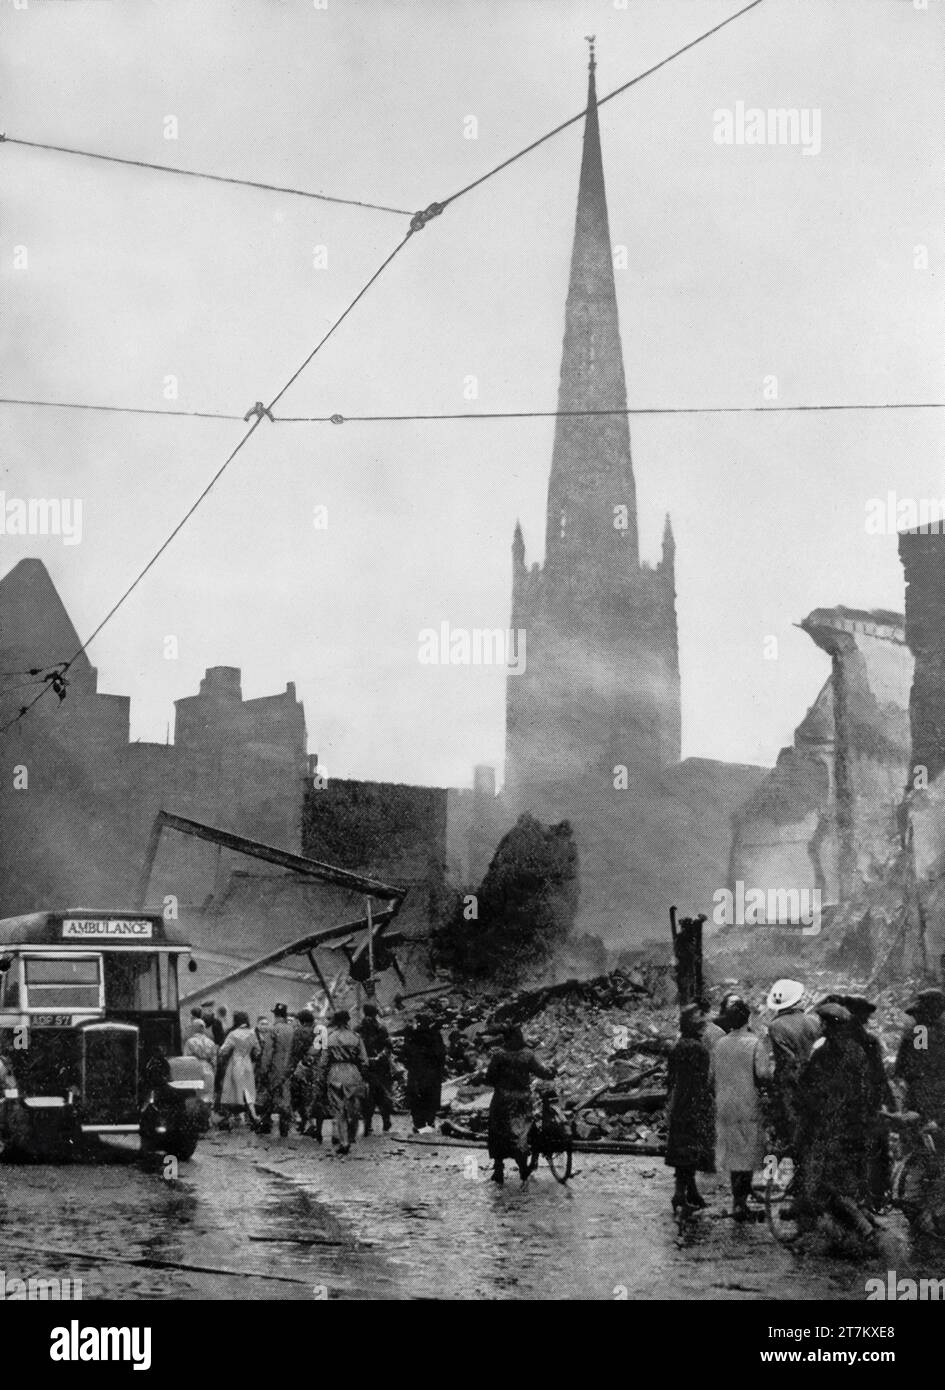 The morning of the 14th November 1940, and people in Coventry, England survey the damage caused by the previous nights Luftwaffe air raids during the Second World War. Happily the city's cathedral spire is still standing Stock Photo